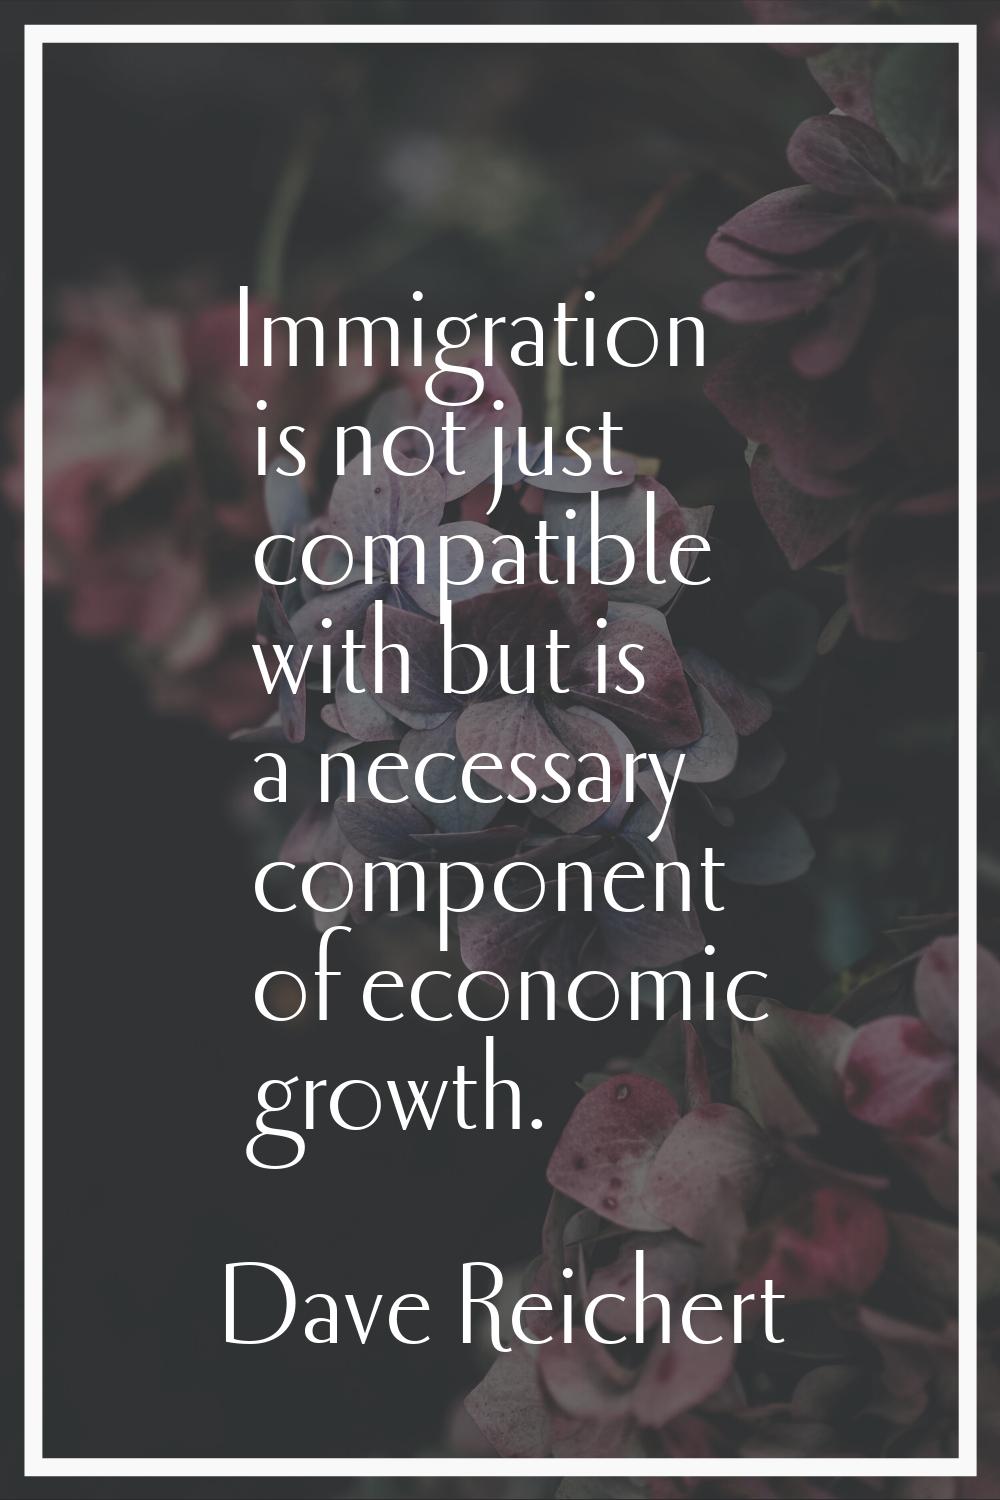 Immigration is not just compatible with but is a necessary component of economic growth.